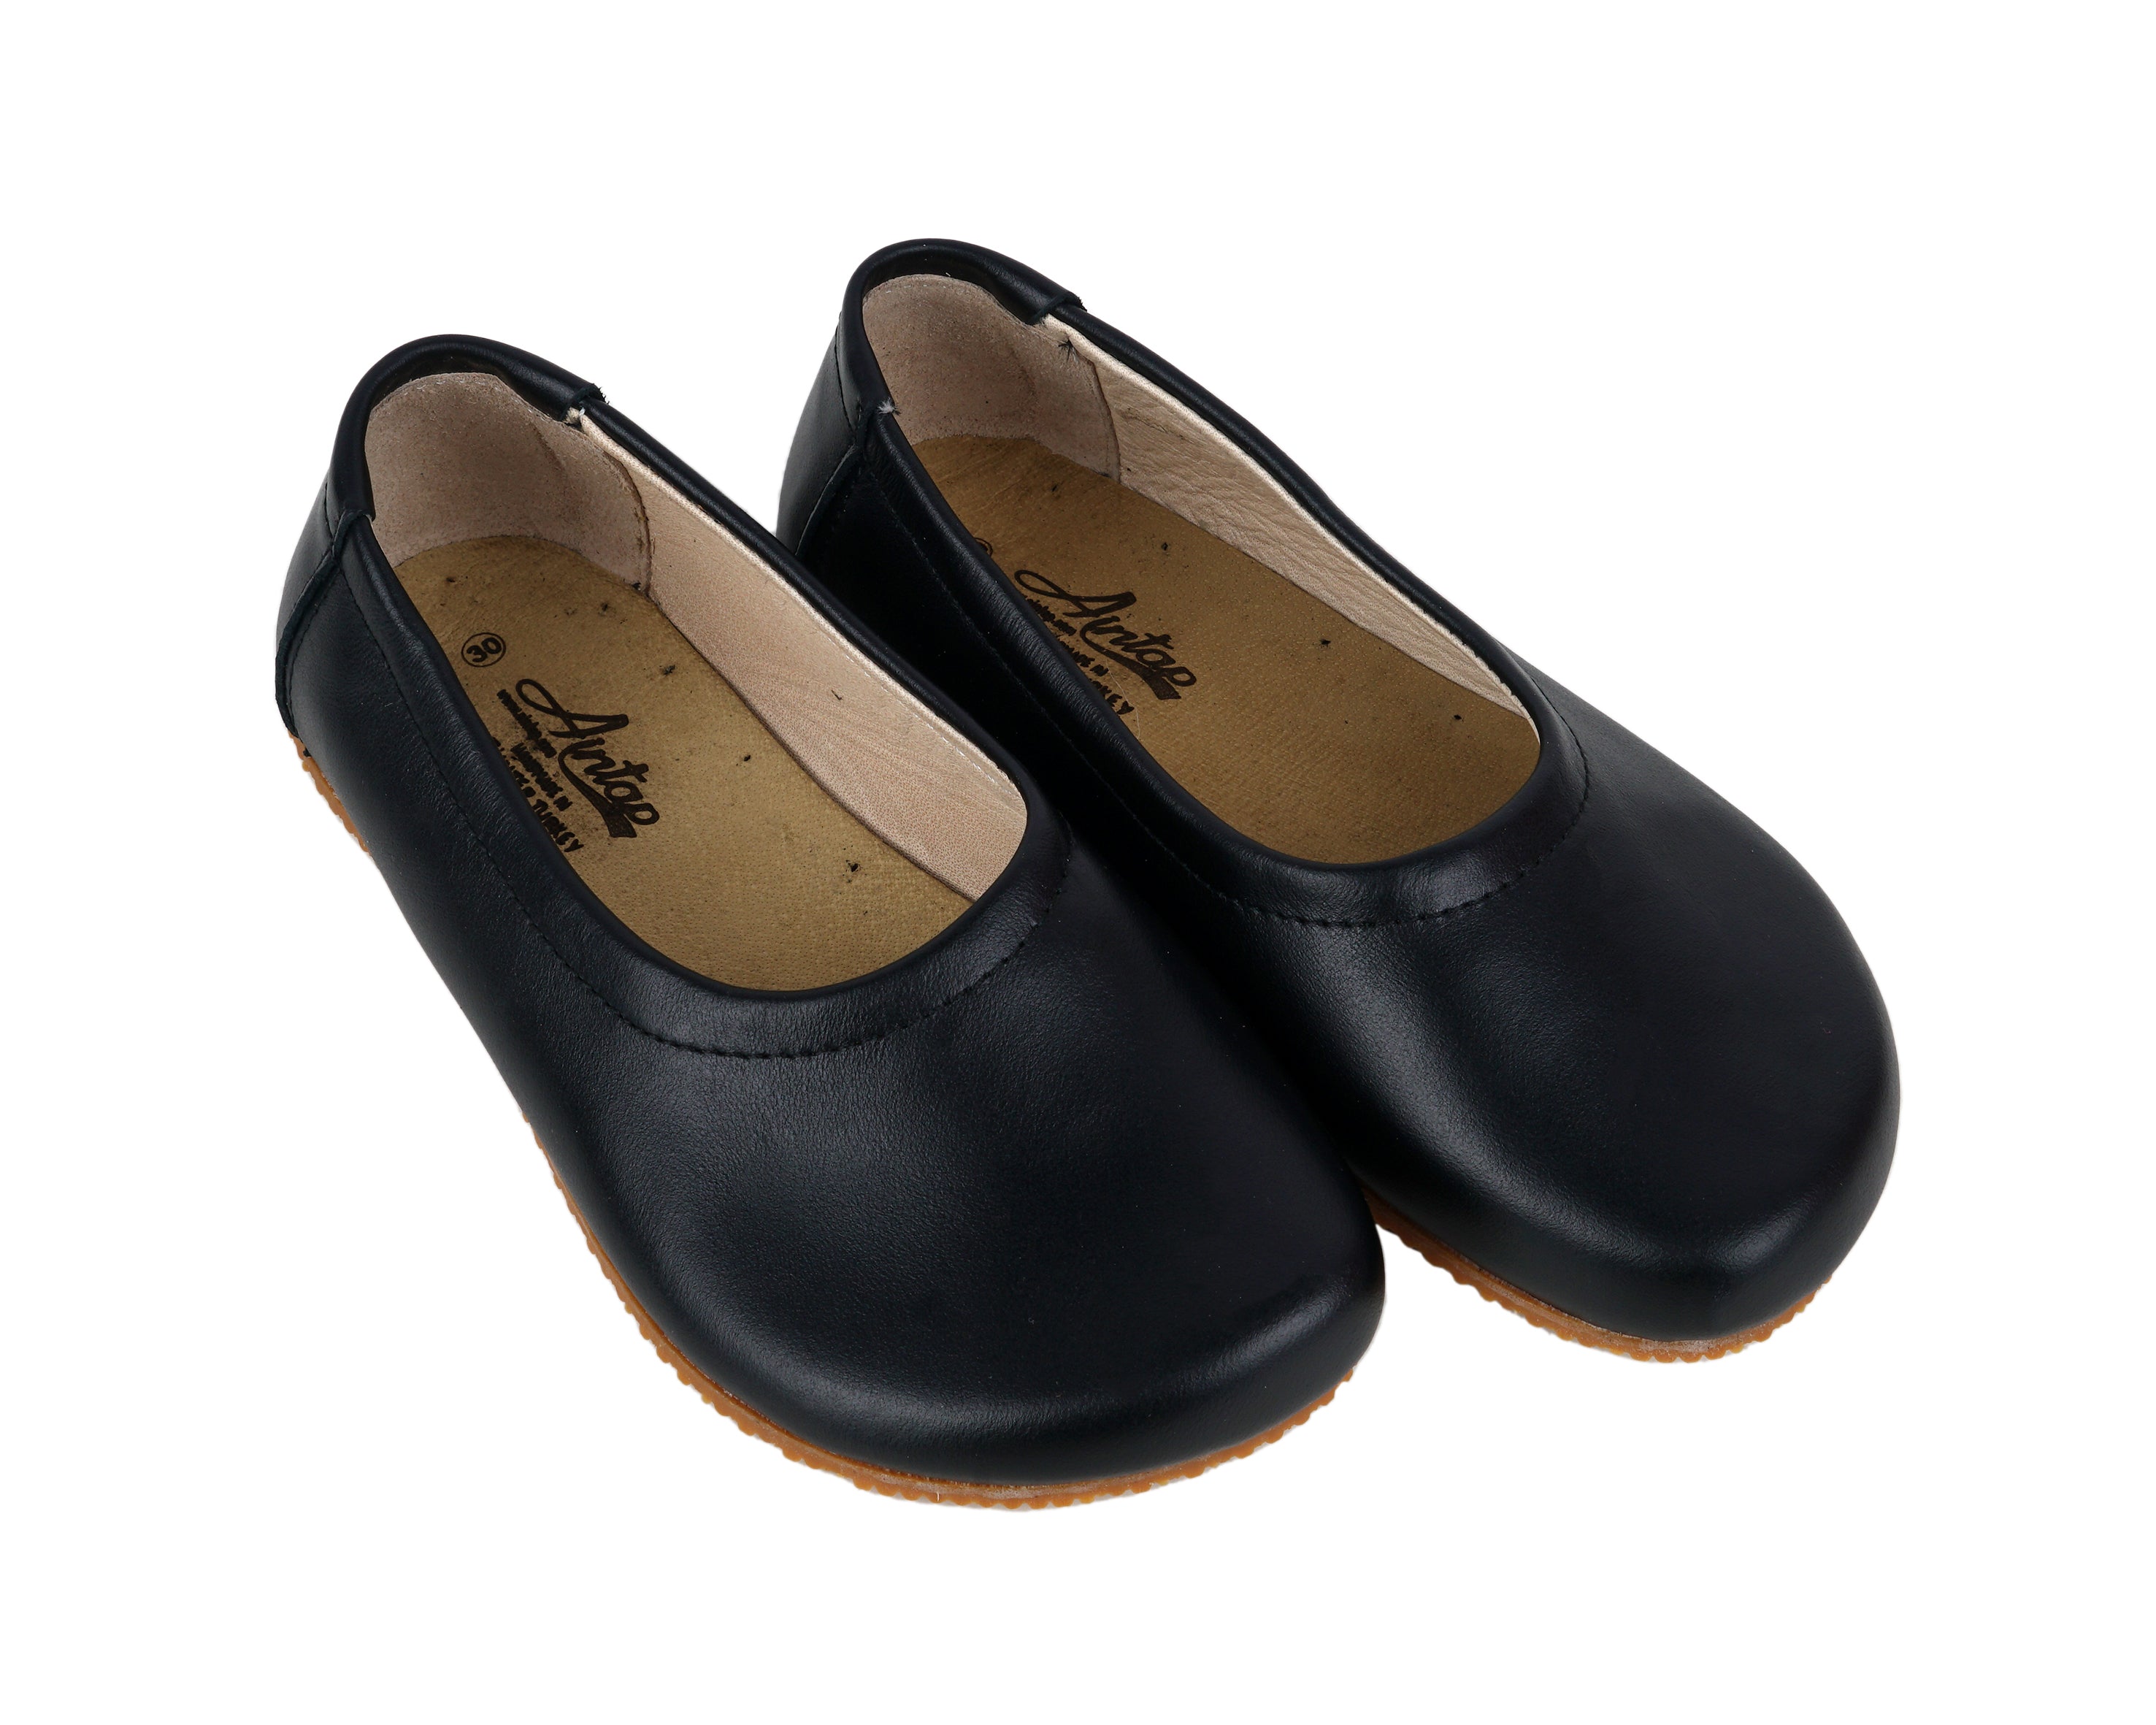 Black Kids Flat Ballet Wide Barefoot Shoes Smooth Leather Handmade Leather & Rubber Sole